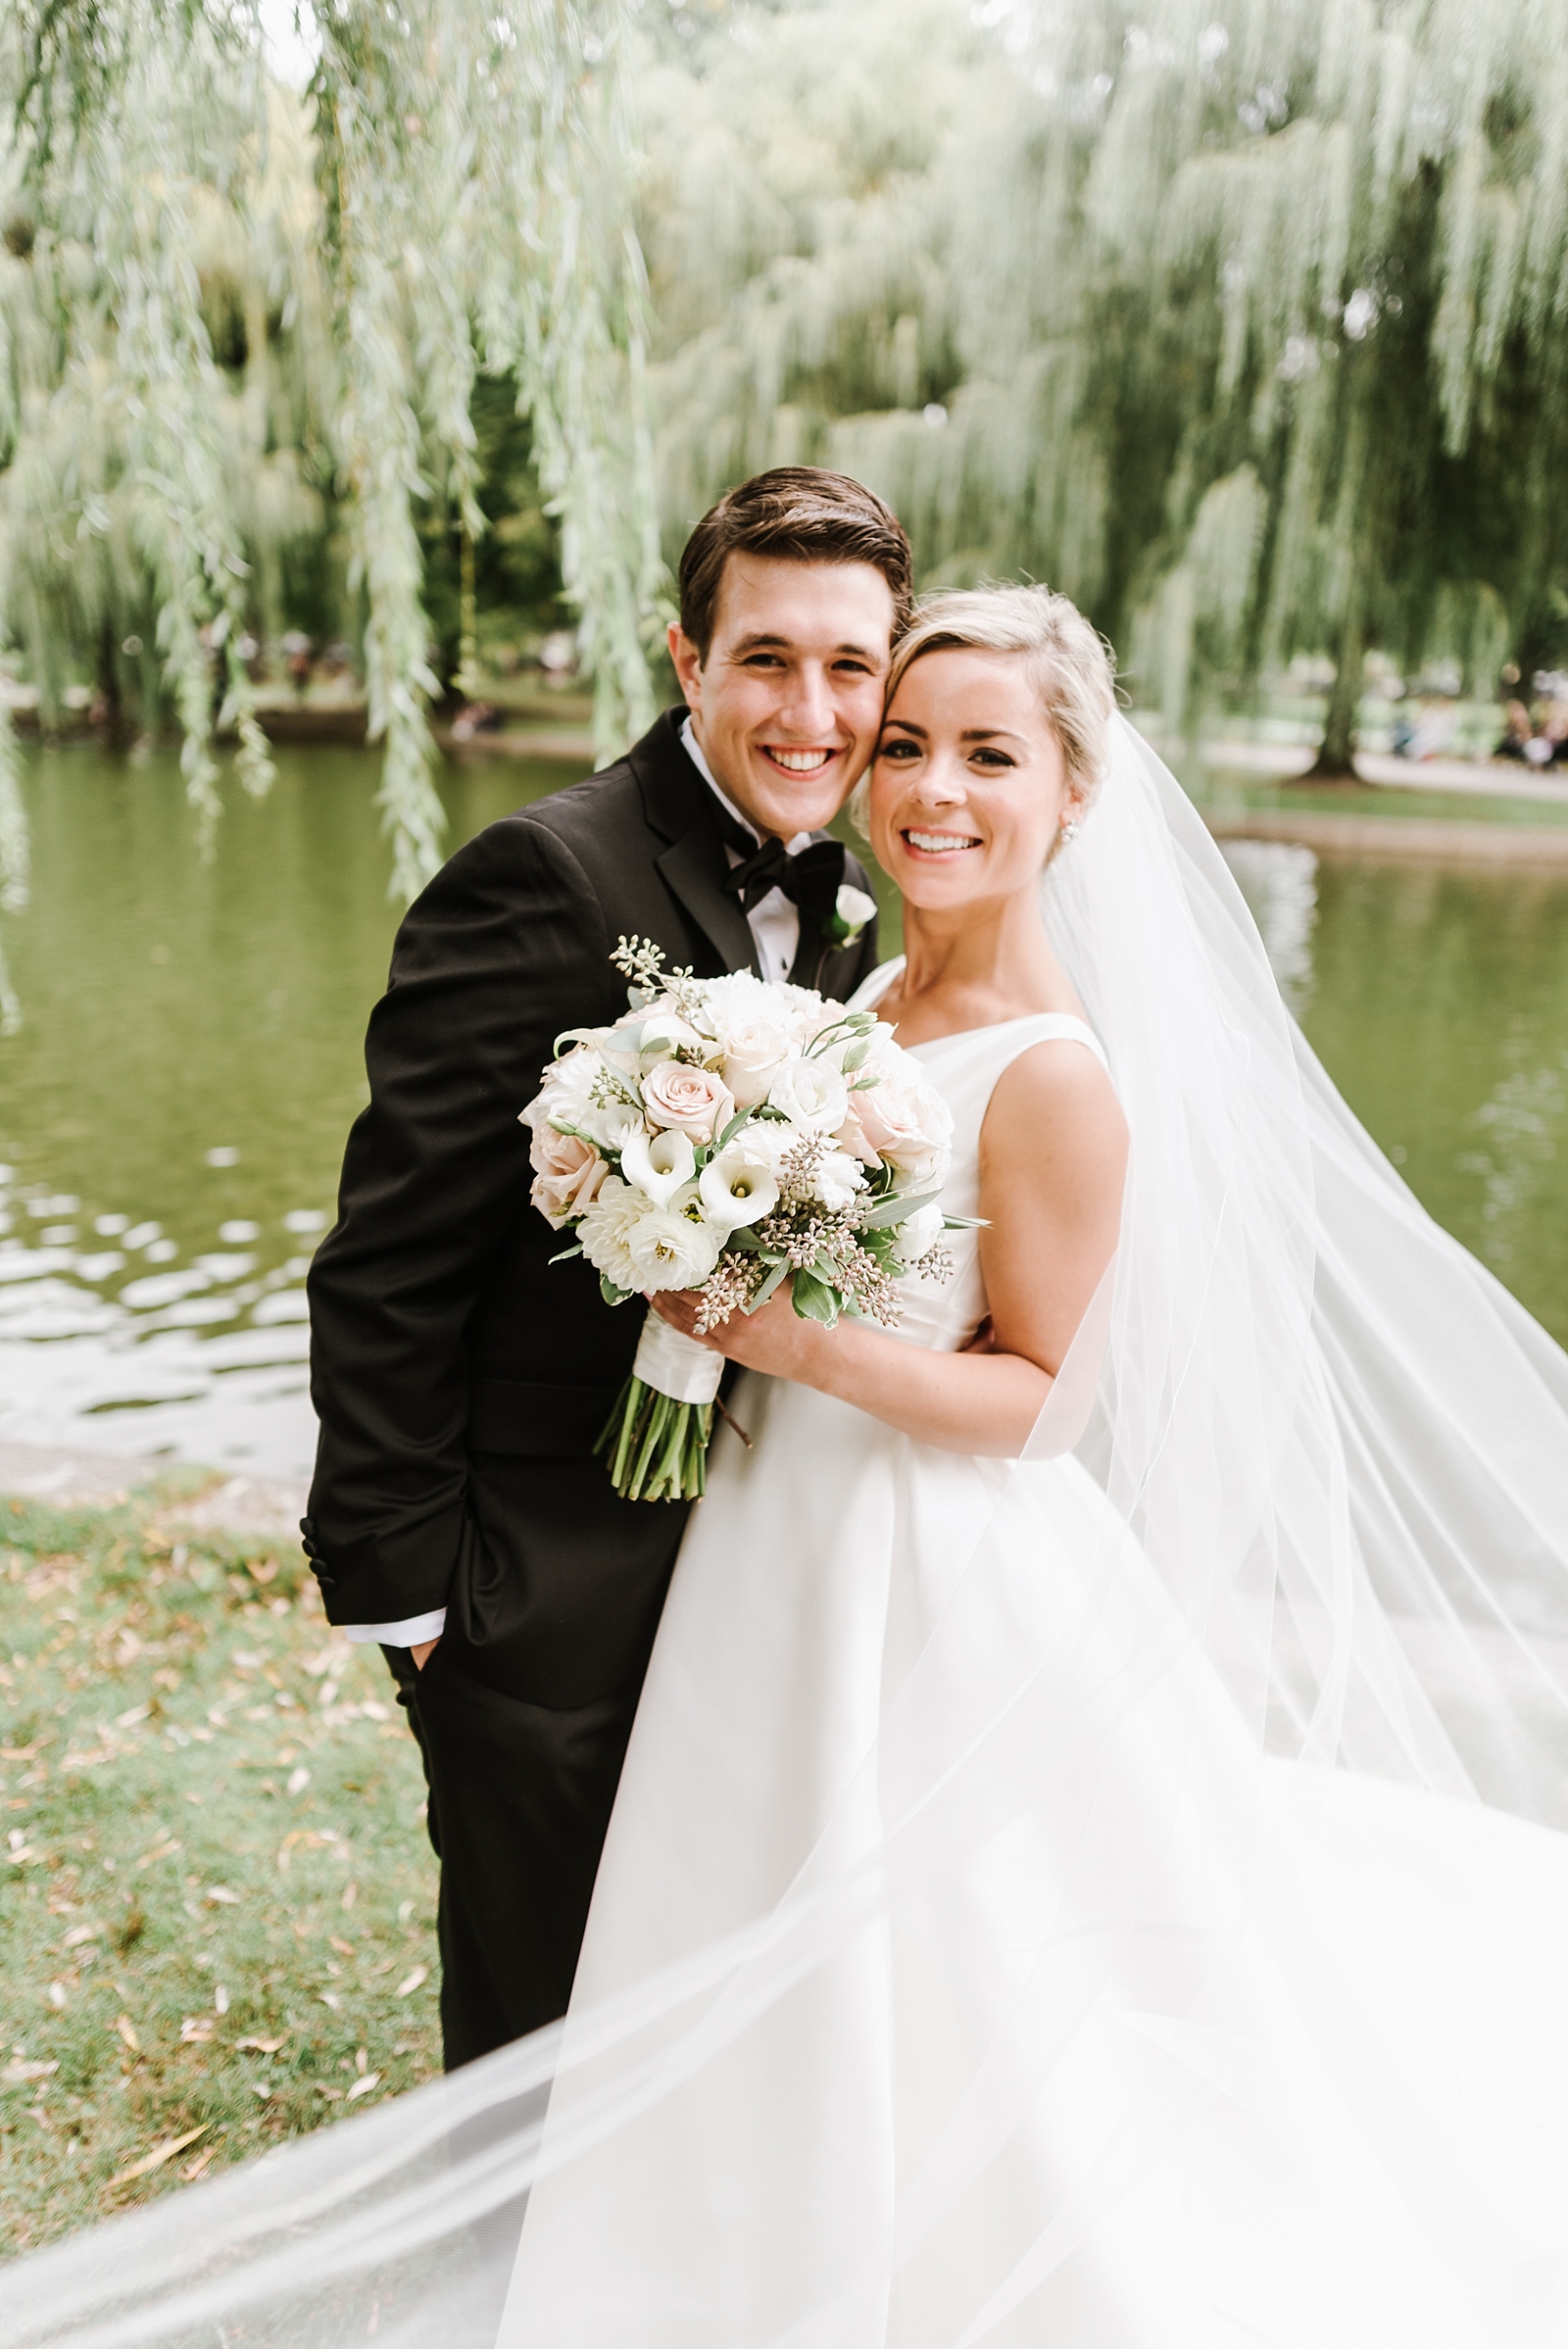 Romantic & Classic Wedding at St. Cecilia's Church & Omni Parker House by Boston Wedding Photographer Annmarie Swift